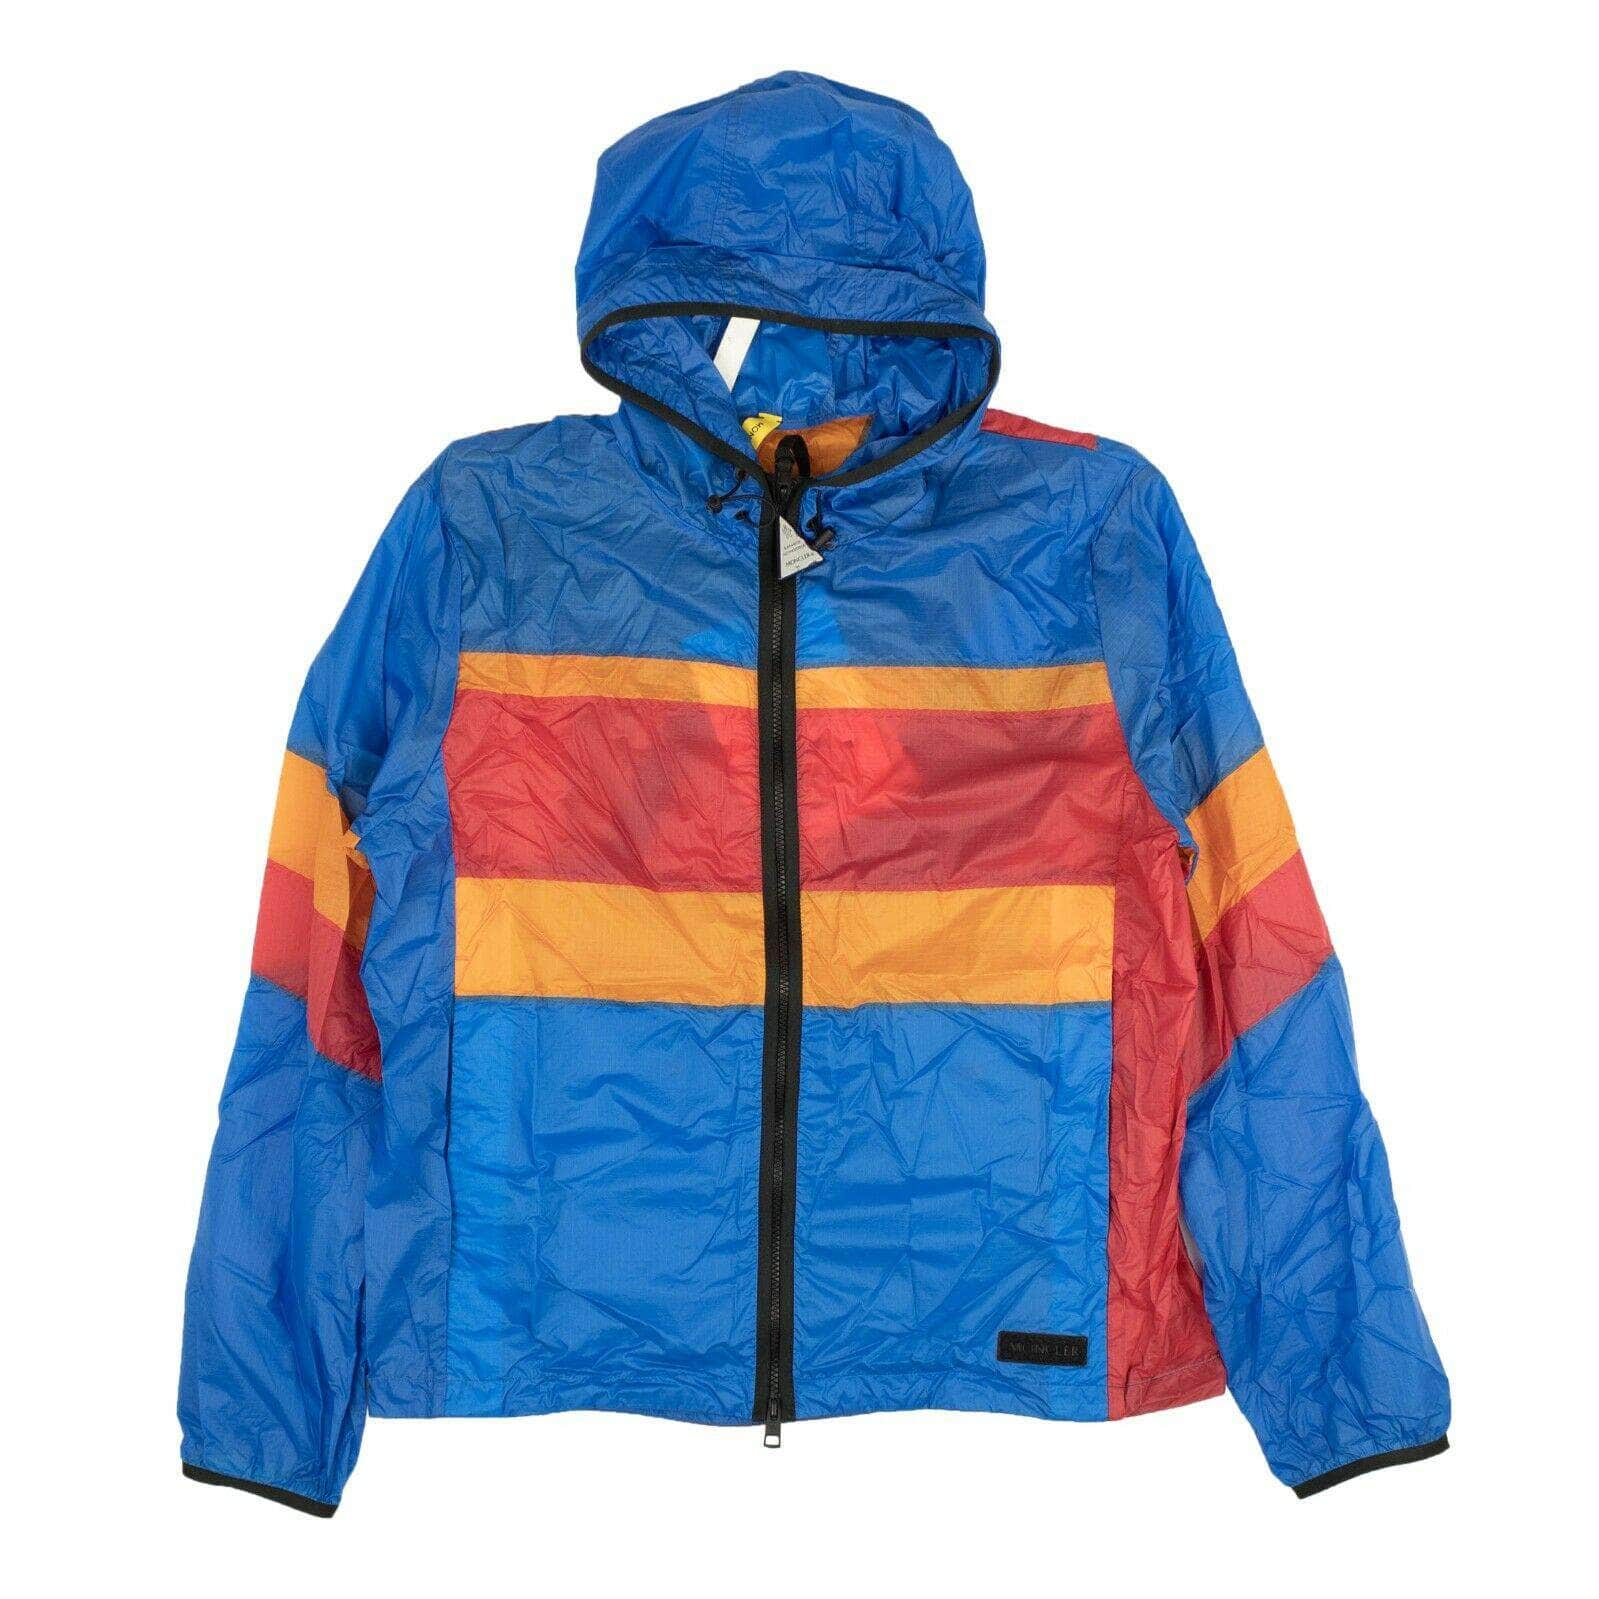 Moncler 1000-2000, channelenable-all, chicmi, couponcollection, gender-mens, main-clothing, mens-down-puffer-jackets, mens-shoes, moncler, size-4 4 Genius Craig Green Multi Striped Jacket 85M-22/4 85M-22/4